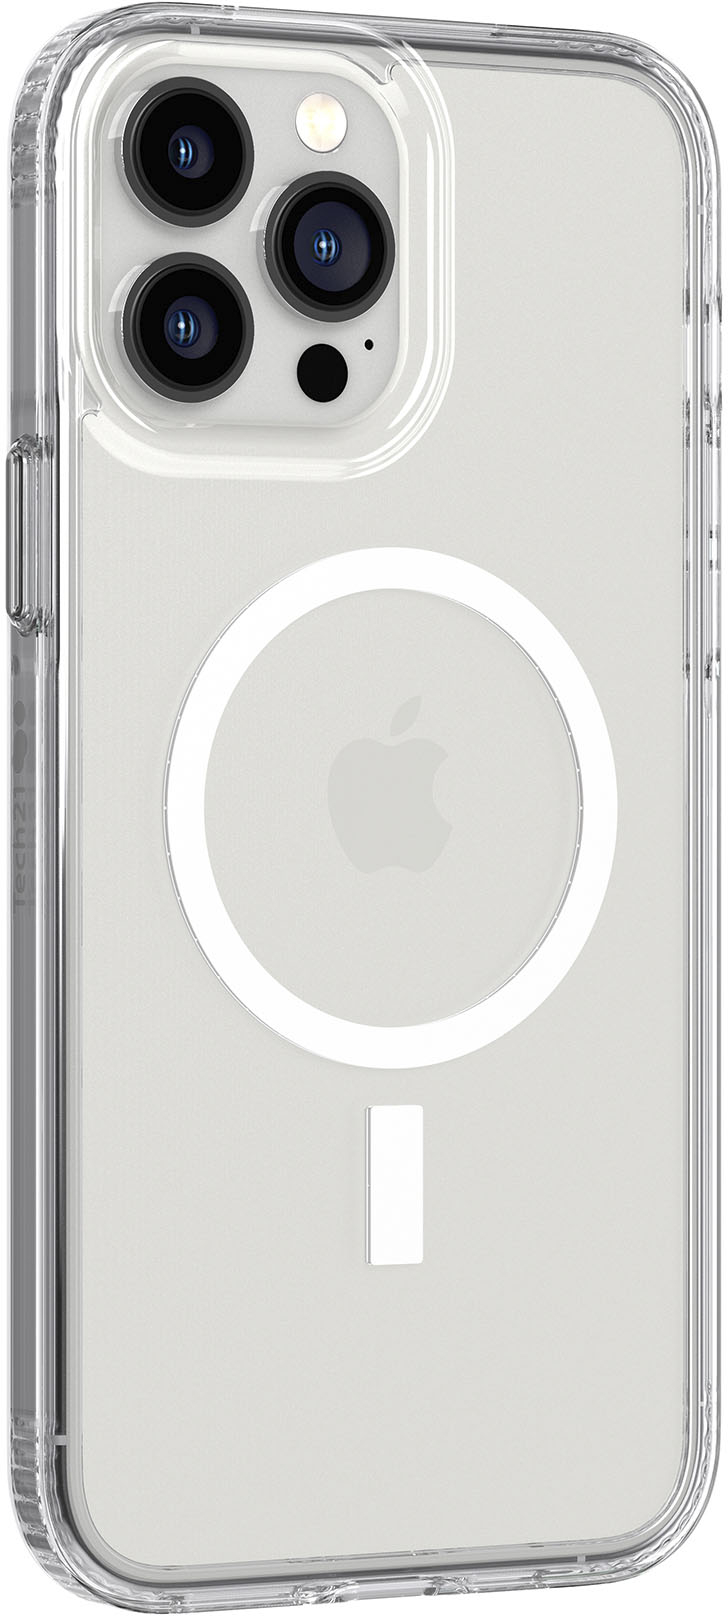 iPhone 12 Pro Max iPhone 12 Pro Clear MagSafe iPhone Case iPhone 12